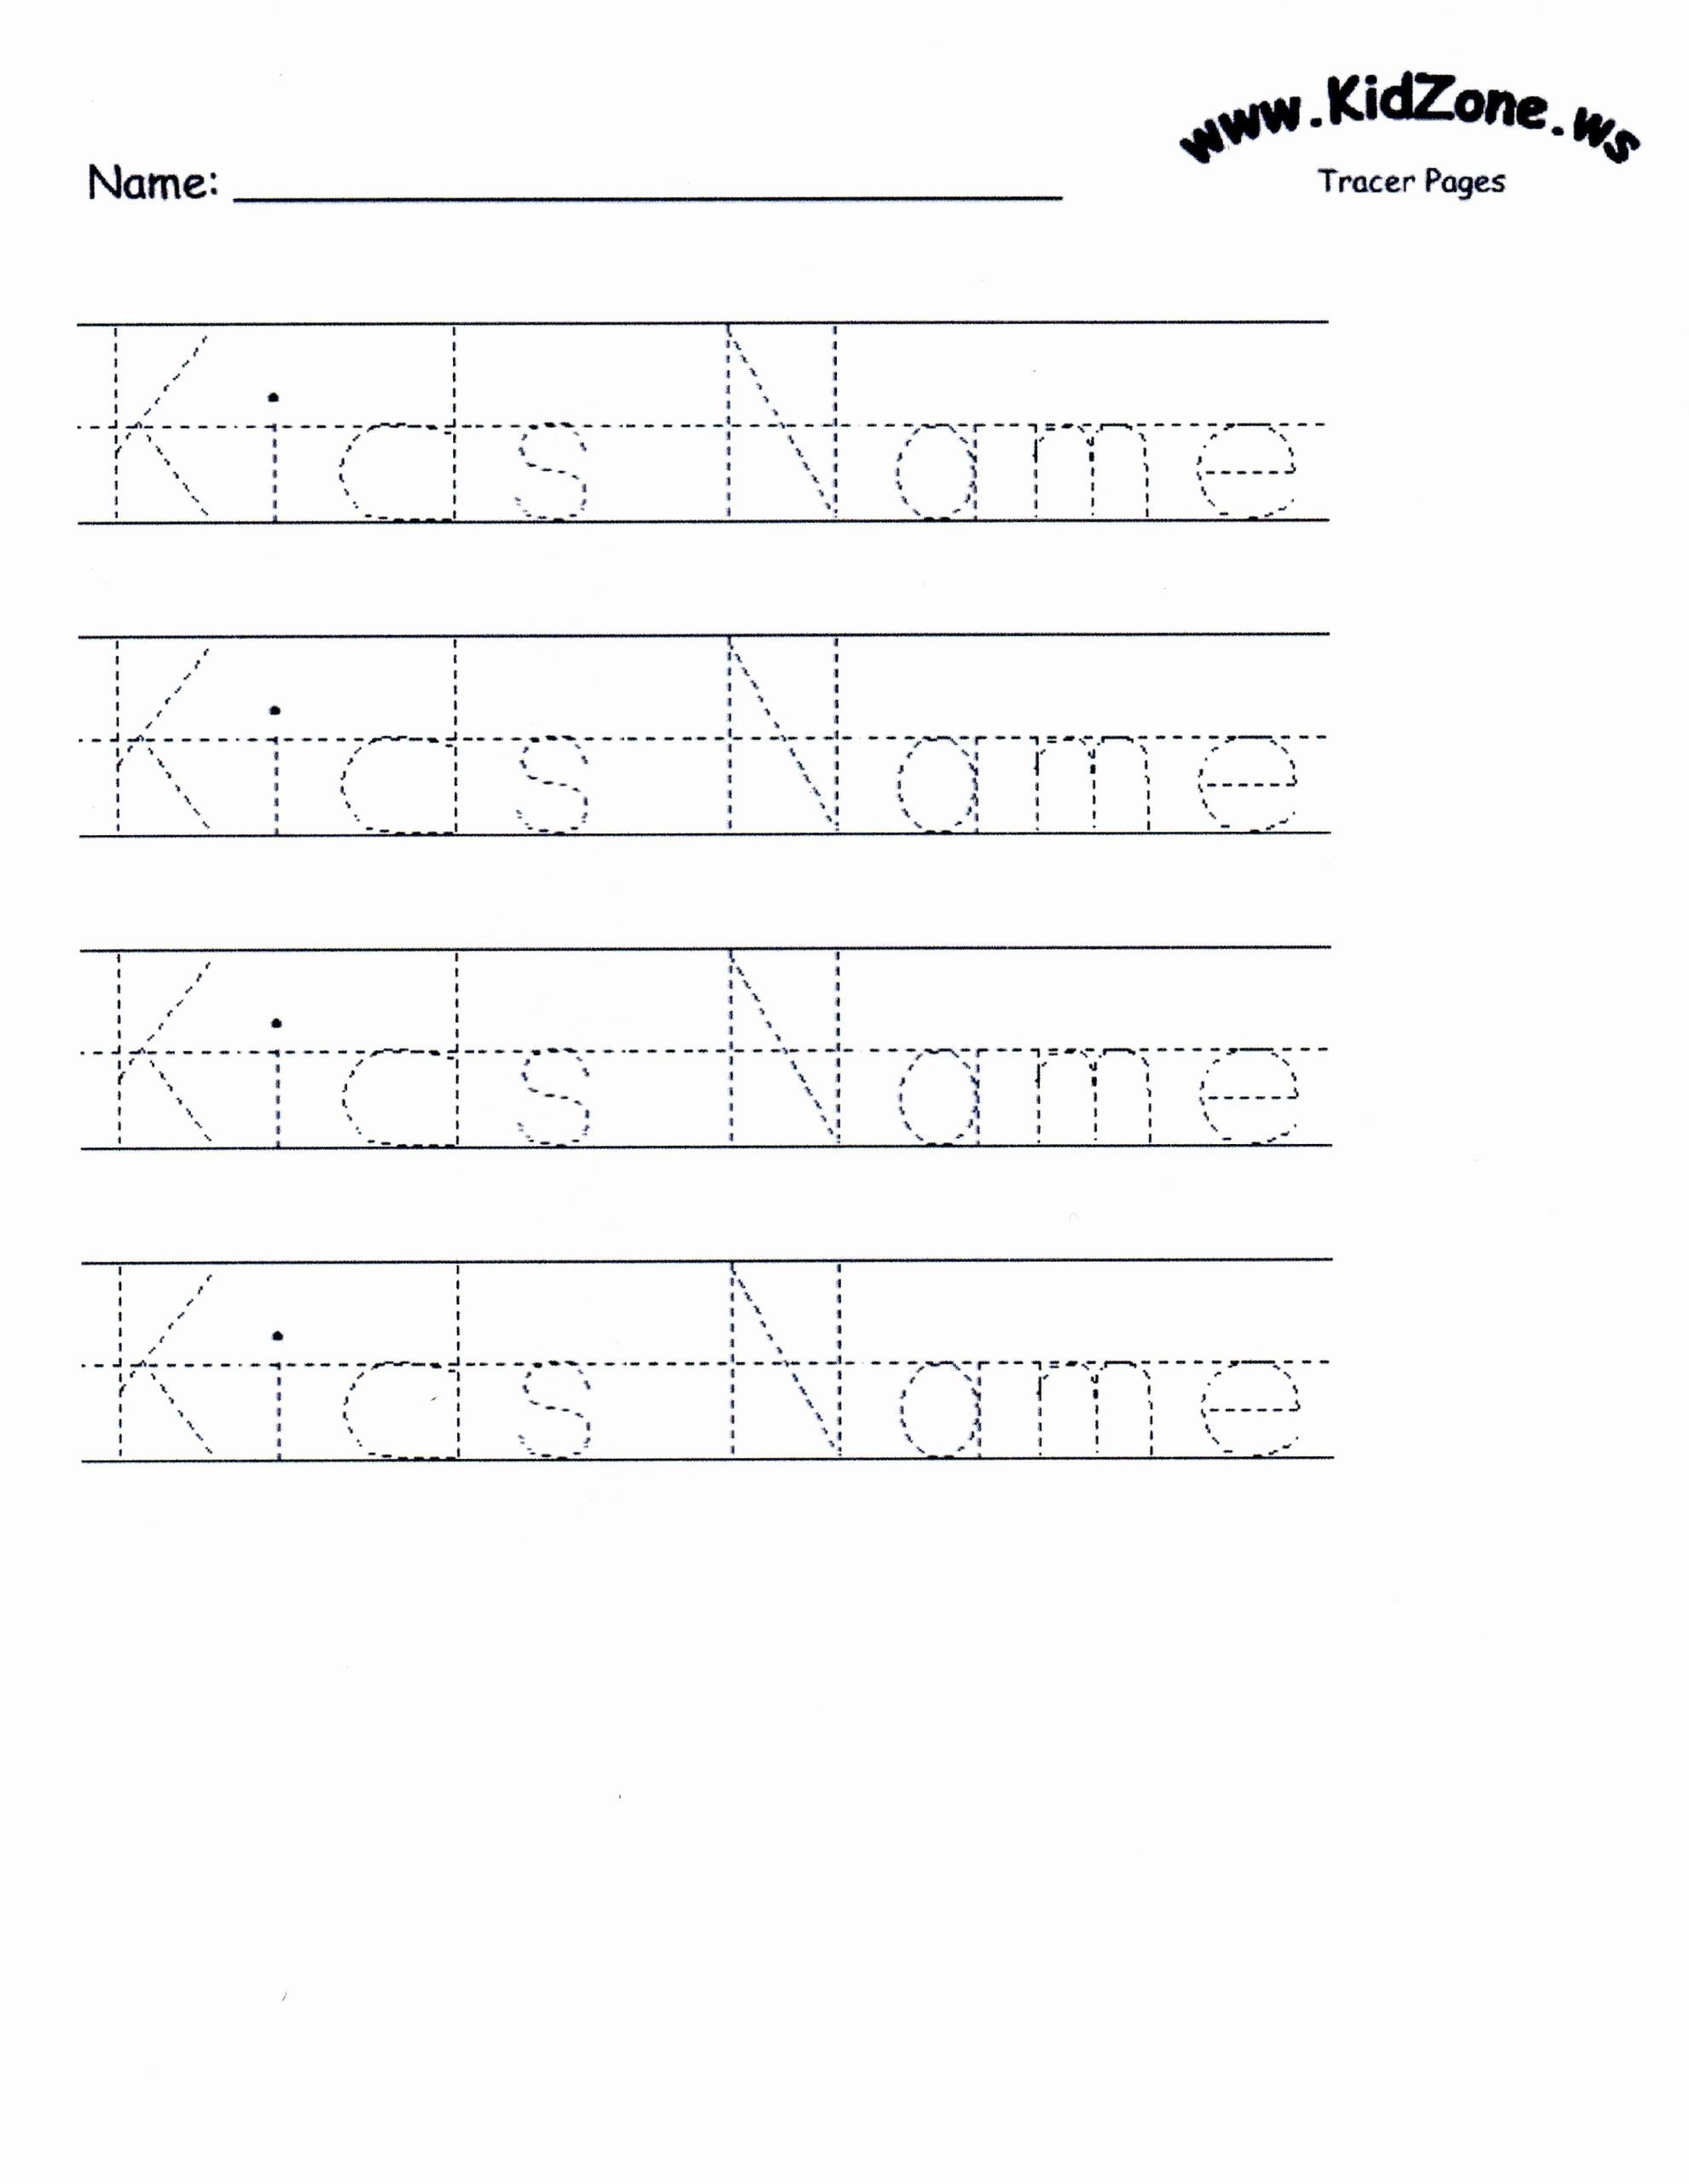 Traceable Name Worksheets For Preschoolers In 2020 | Tracing intended for Name Tracing Font